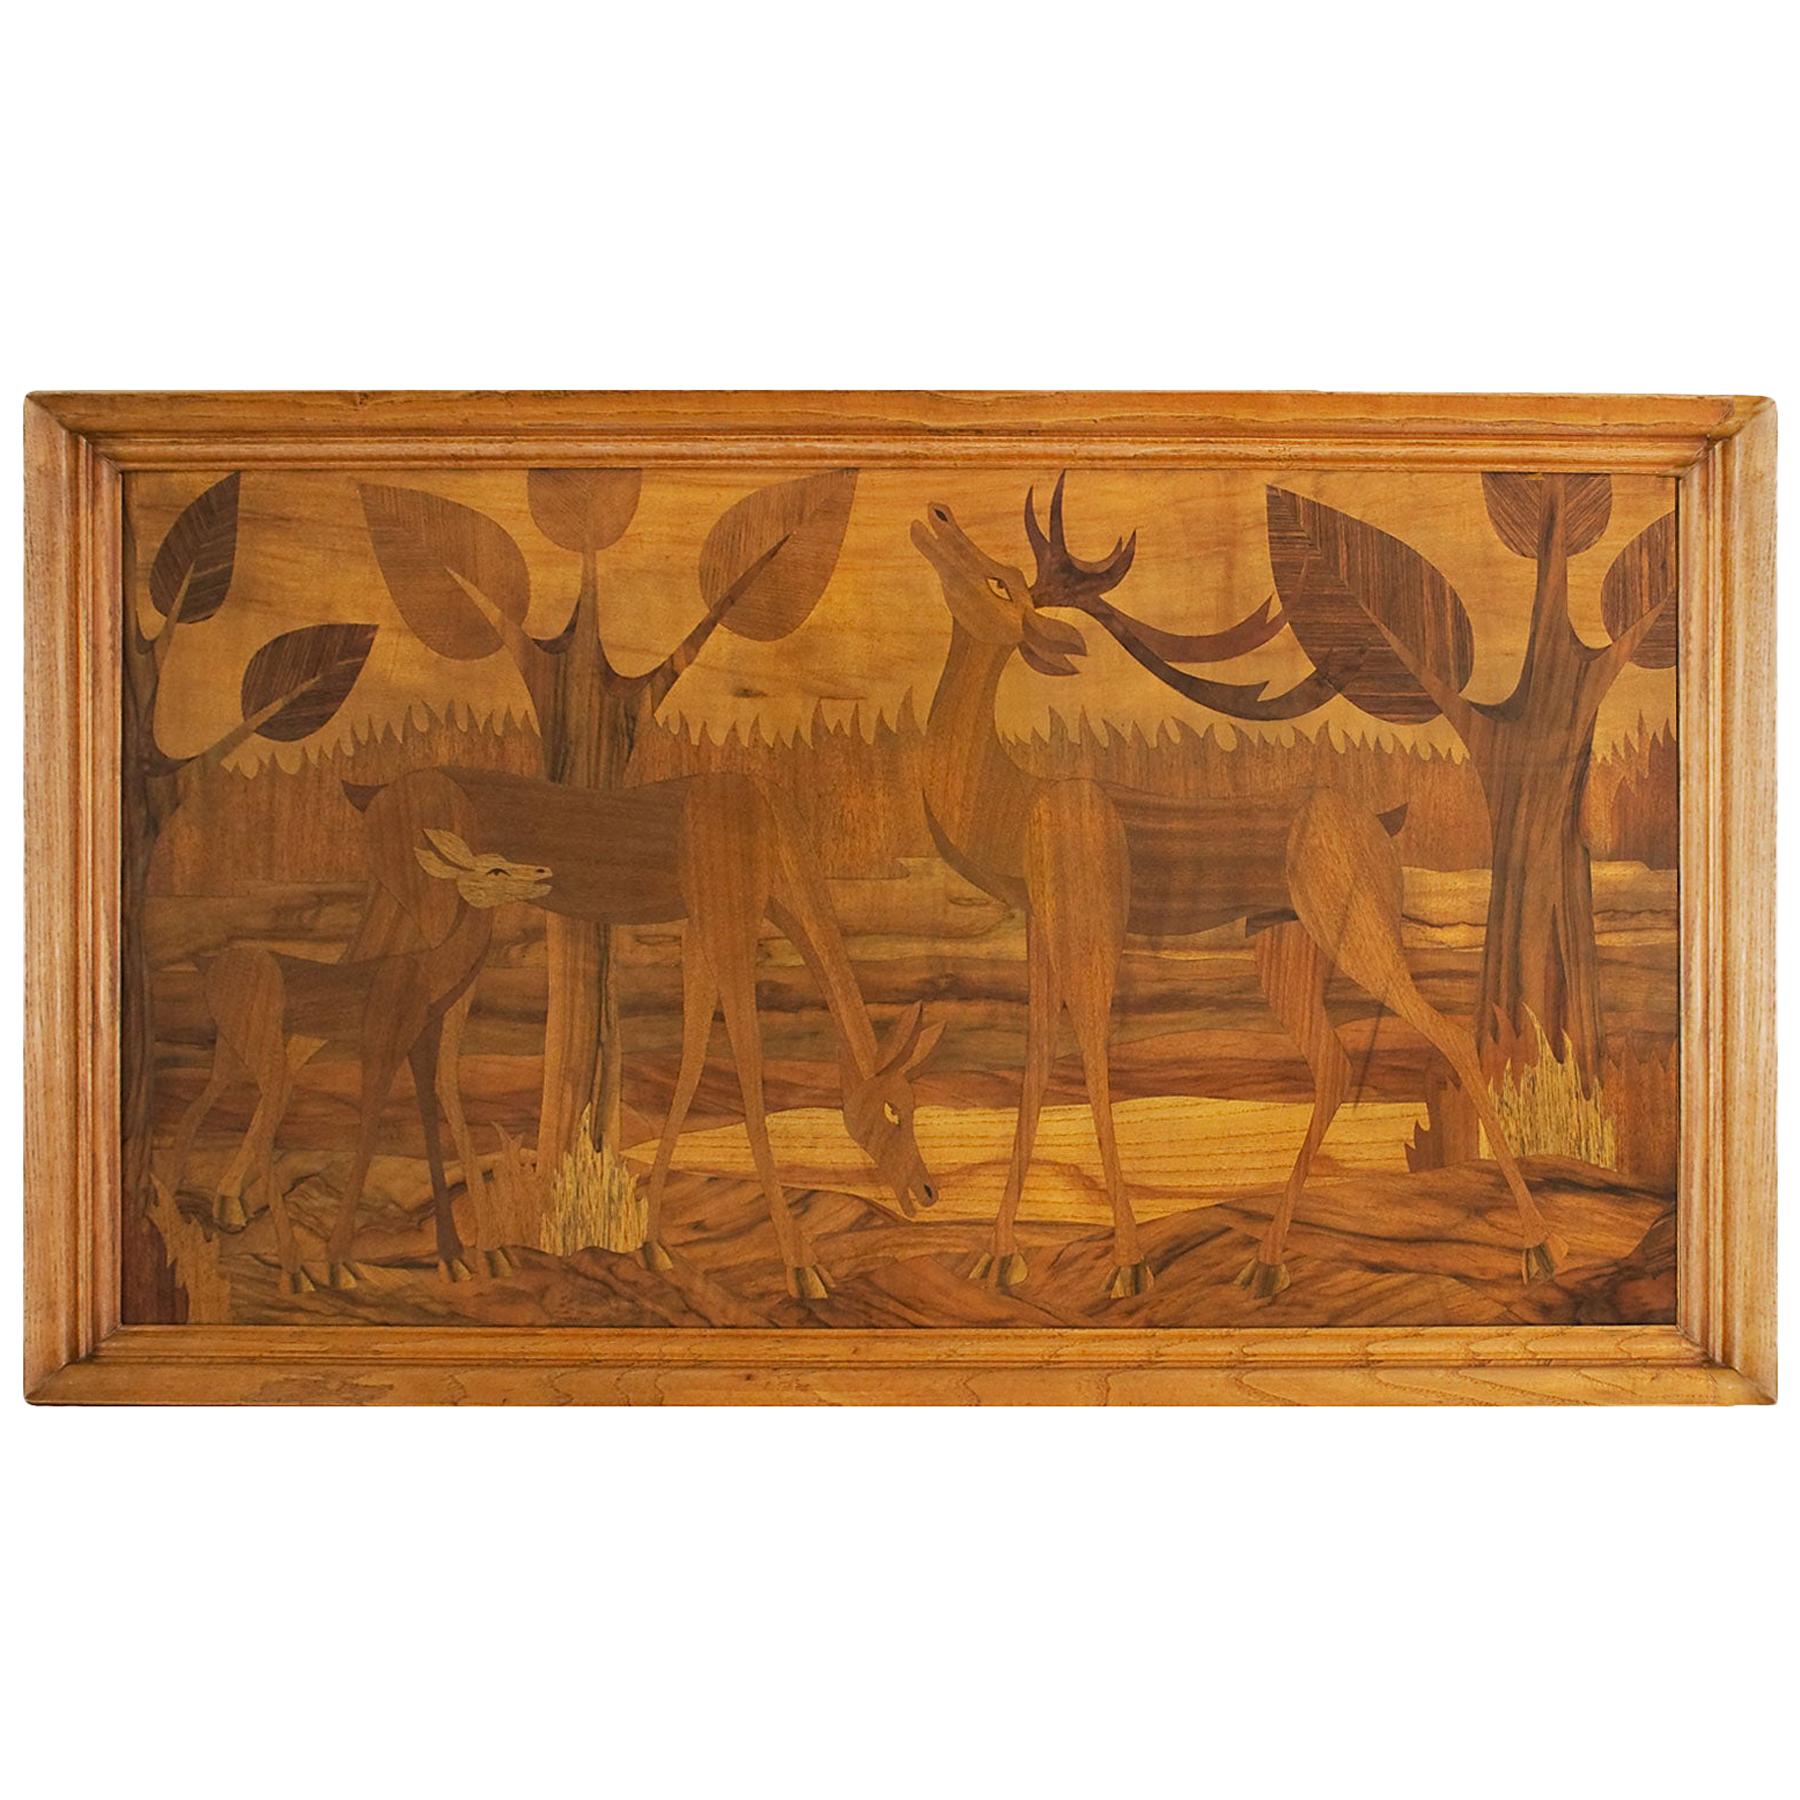 1930s Art Deco Decorative Panel in Wood Marquetry And Ash Frame - Italy